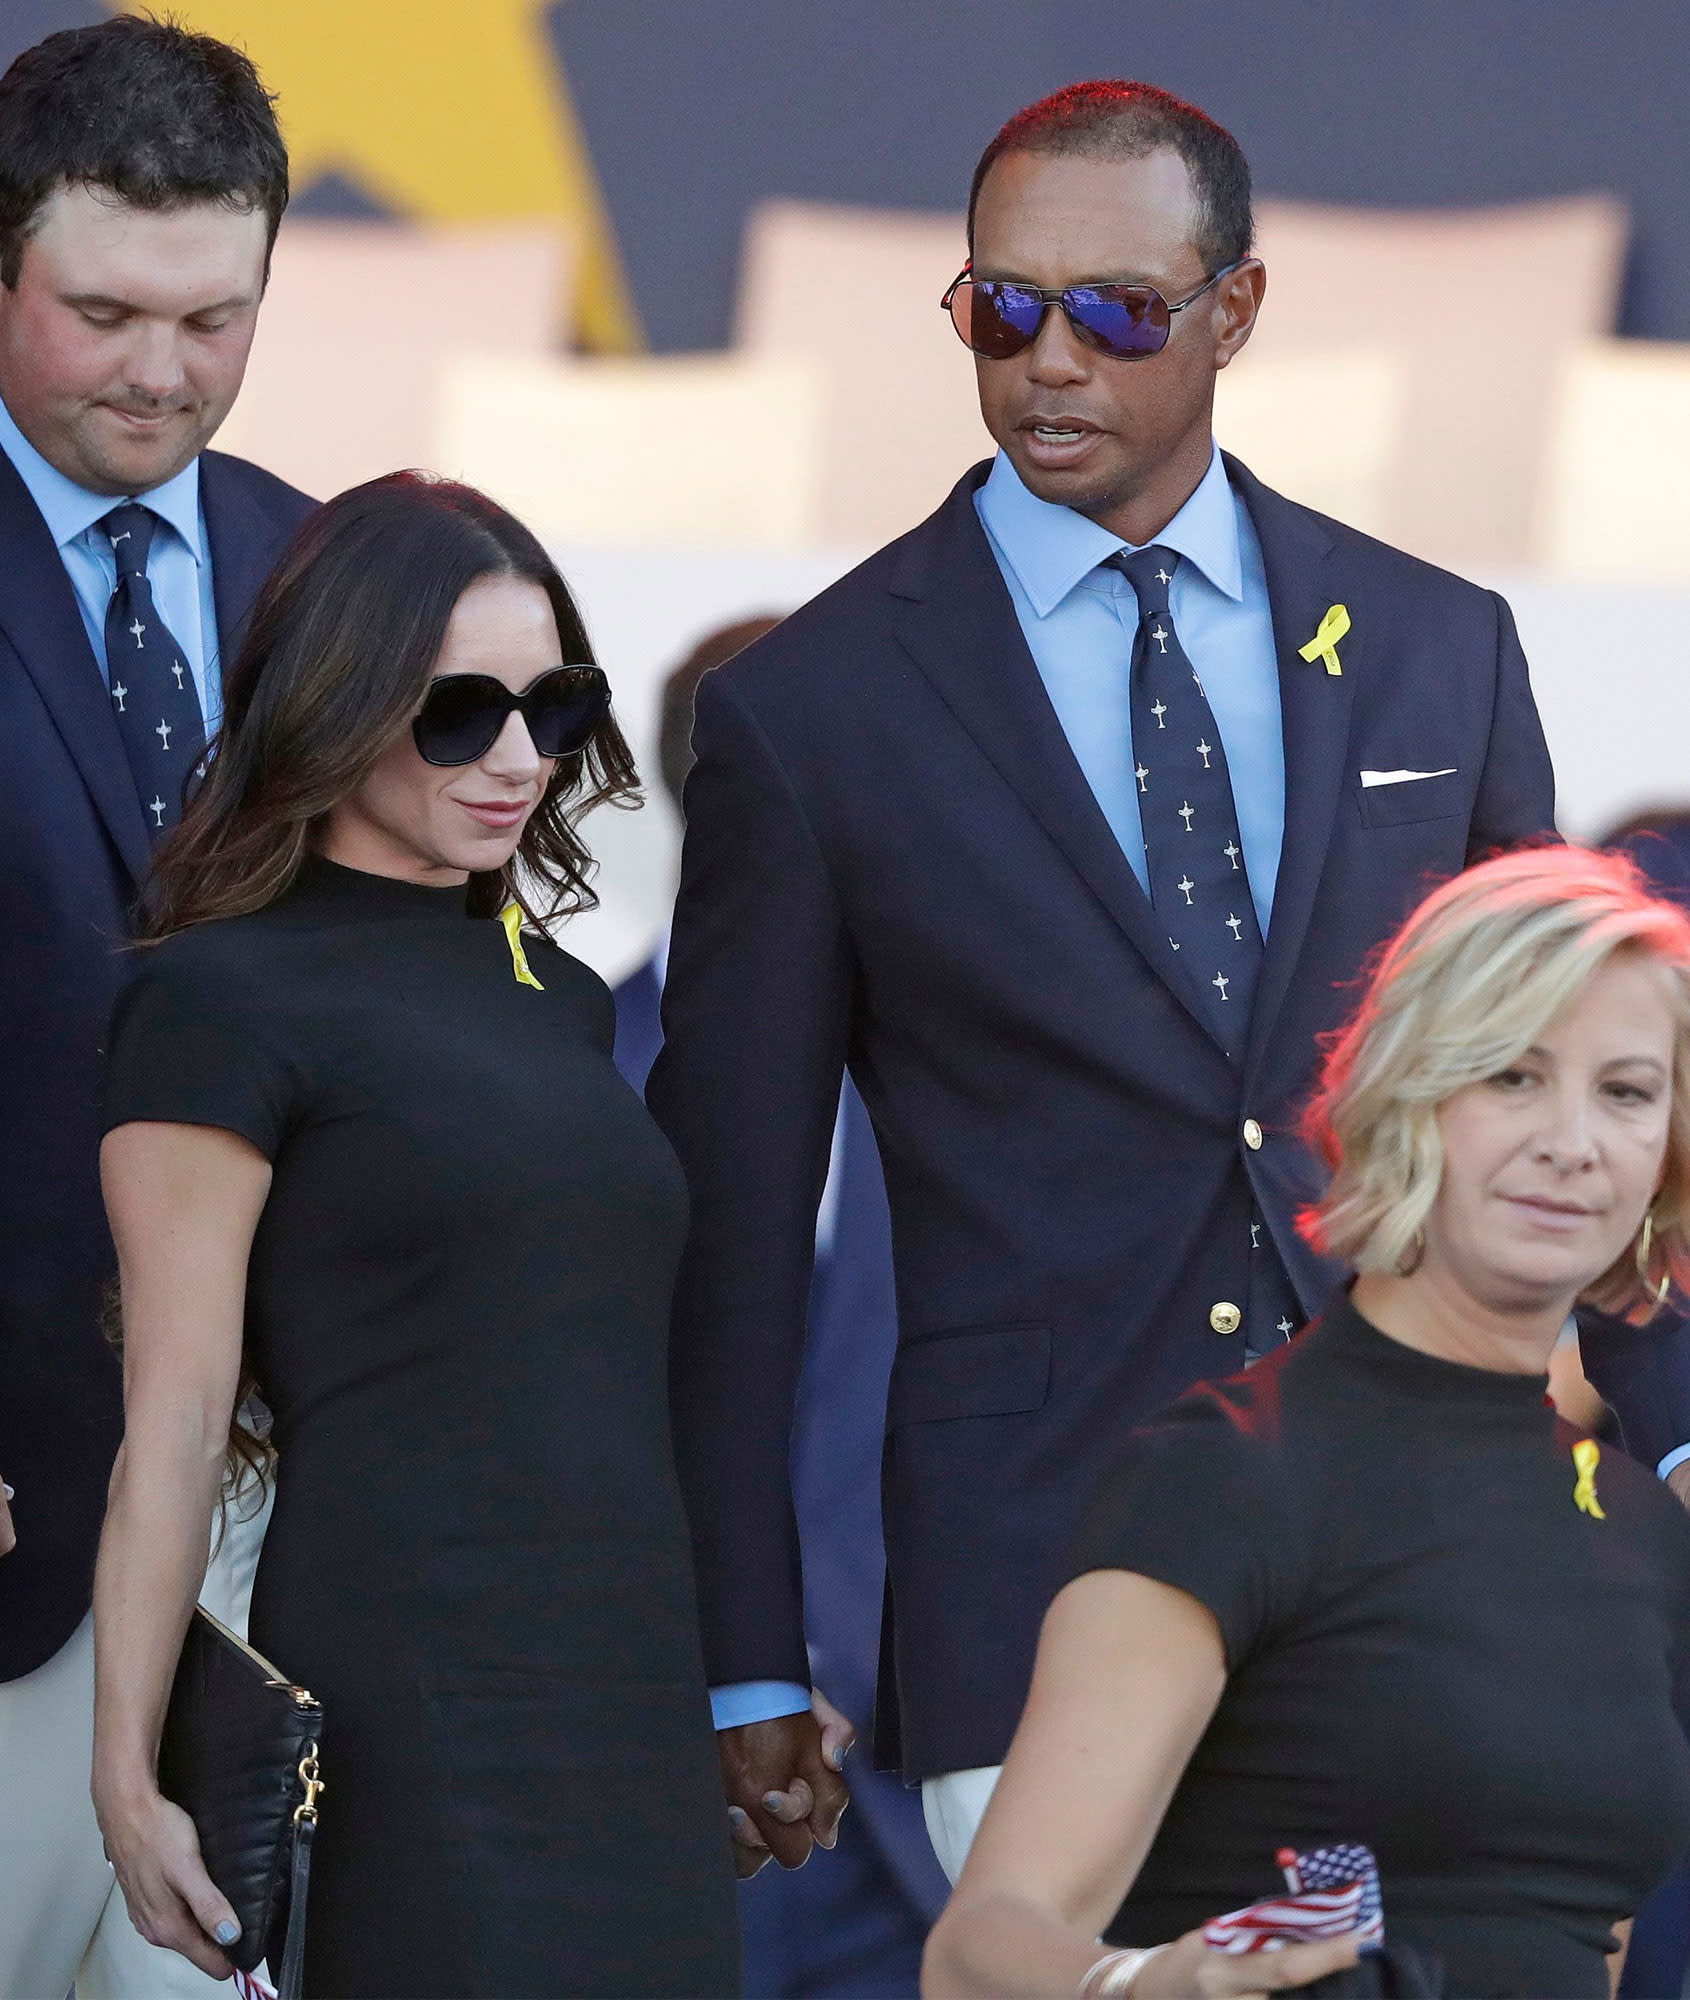 Tiger Woods and Girlfriend Erica Herman Walk Hand-in-Hand at 2018 Ryder Cup Opening ...1690 x 2000